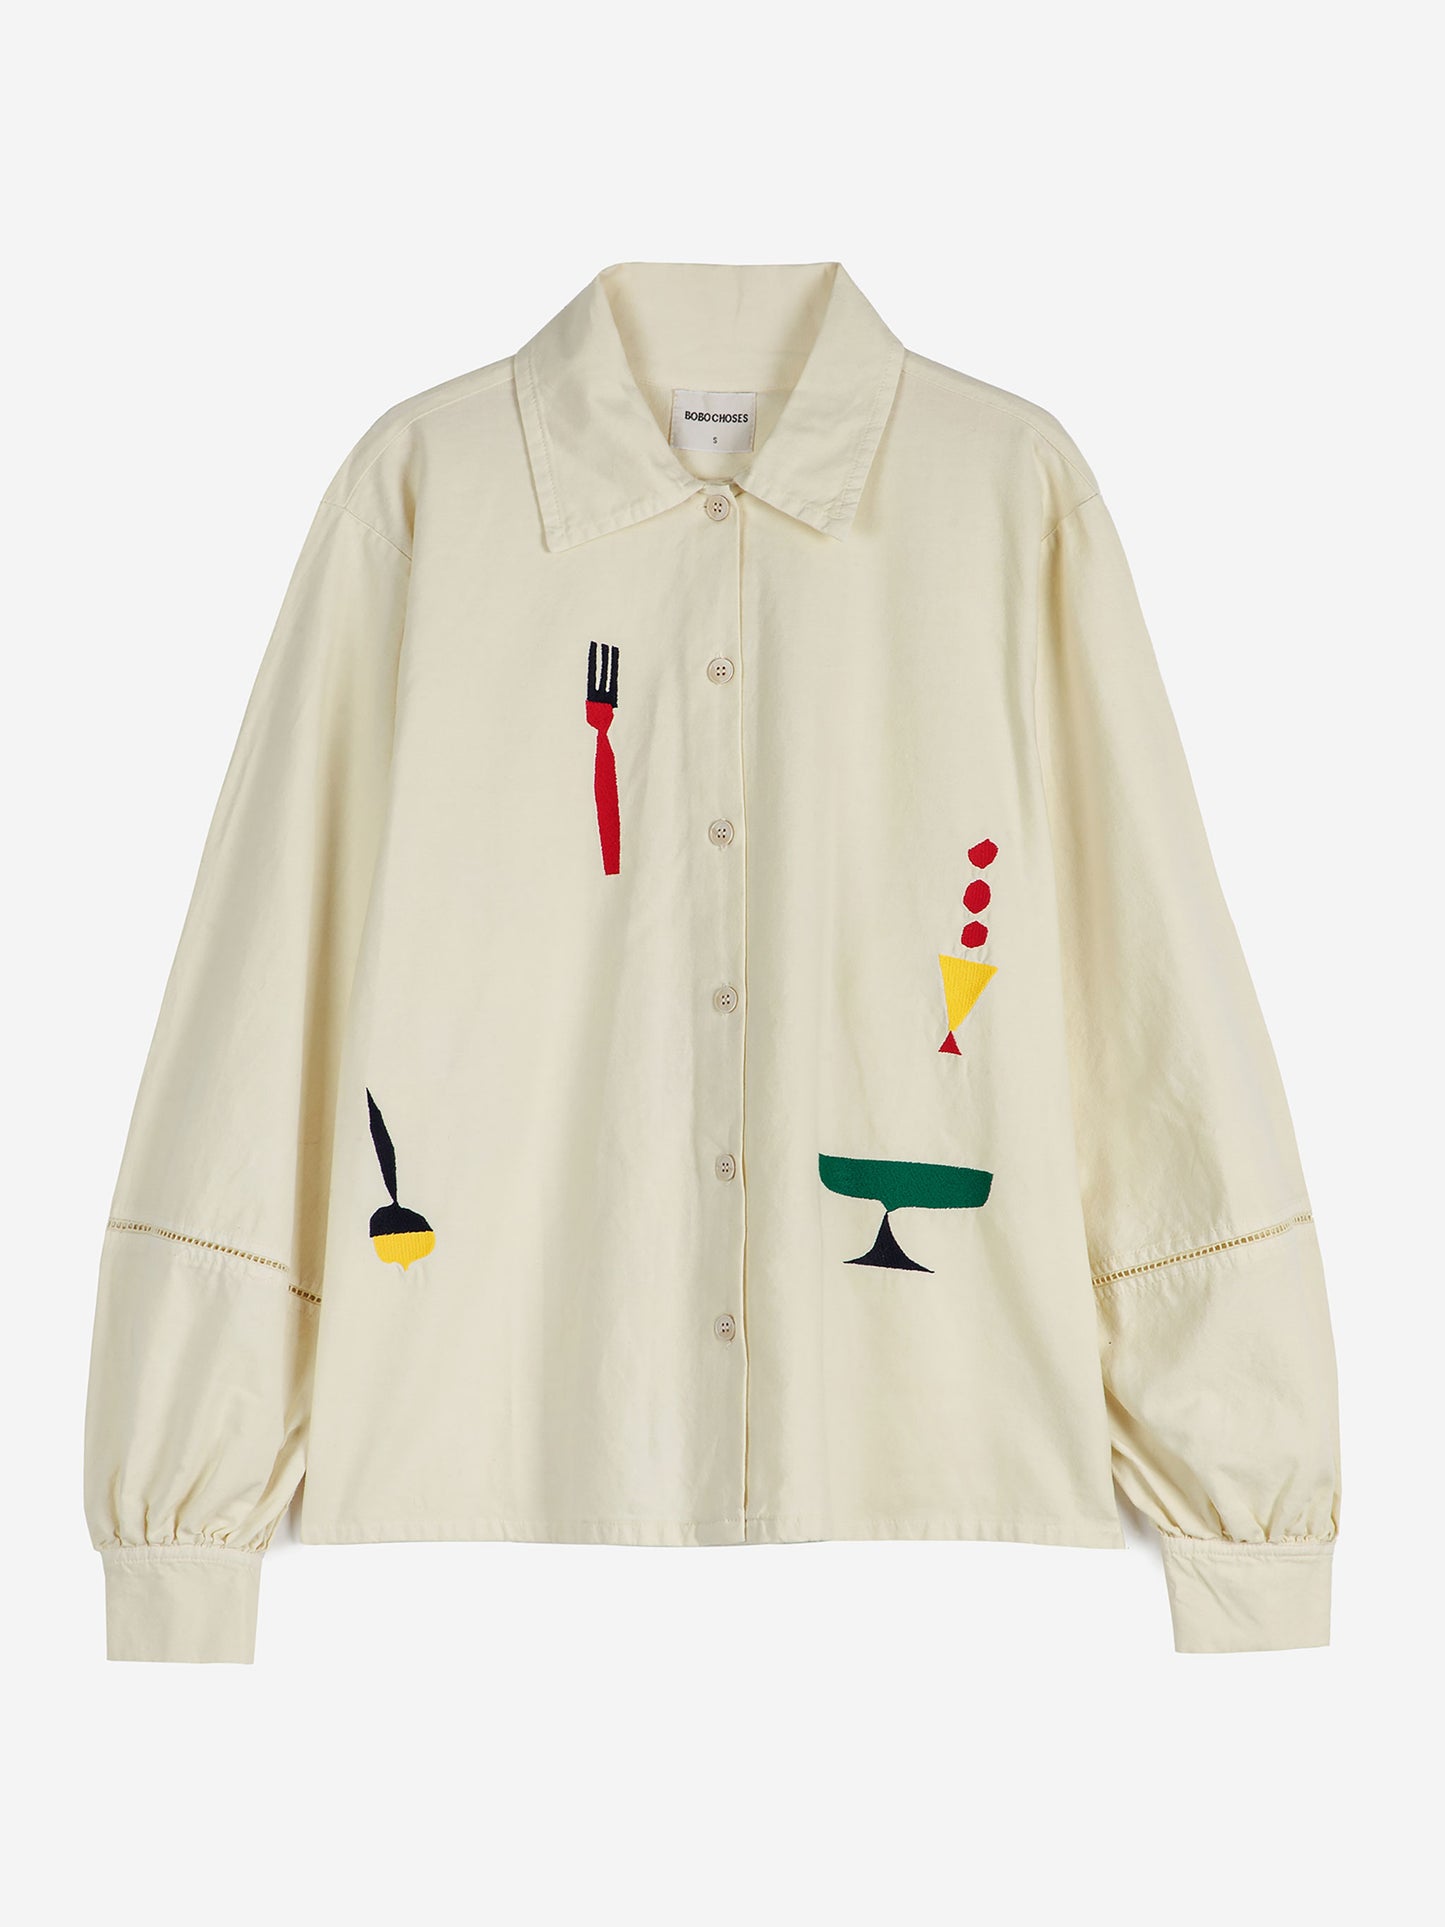 The Feast embroidered shirt